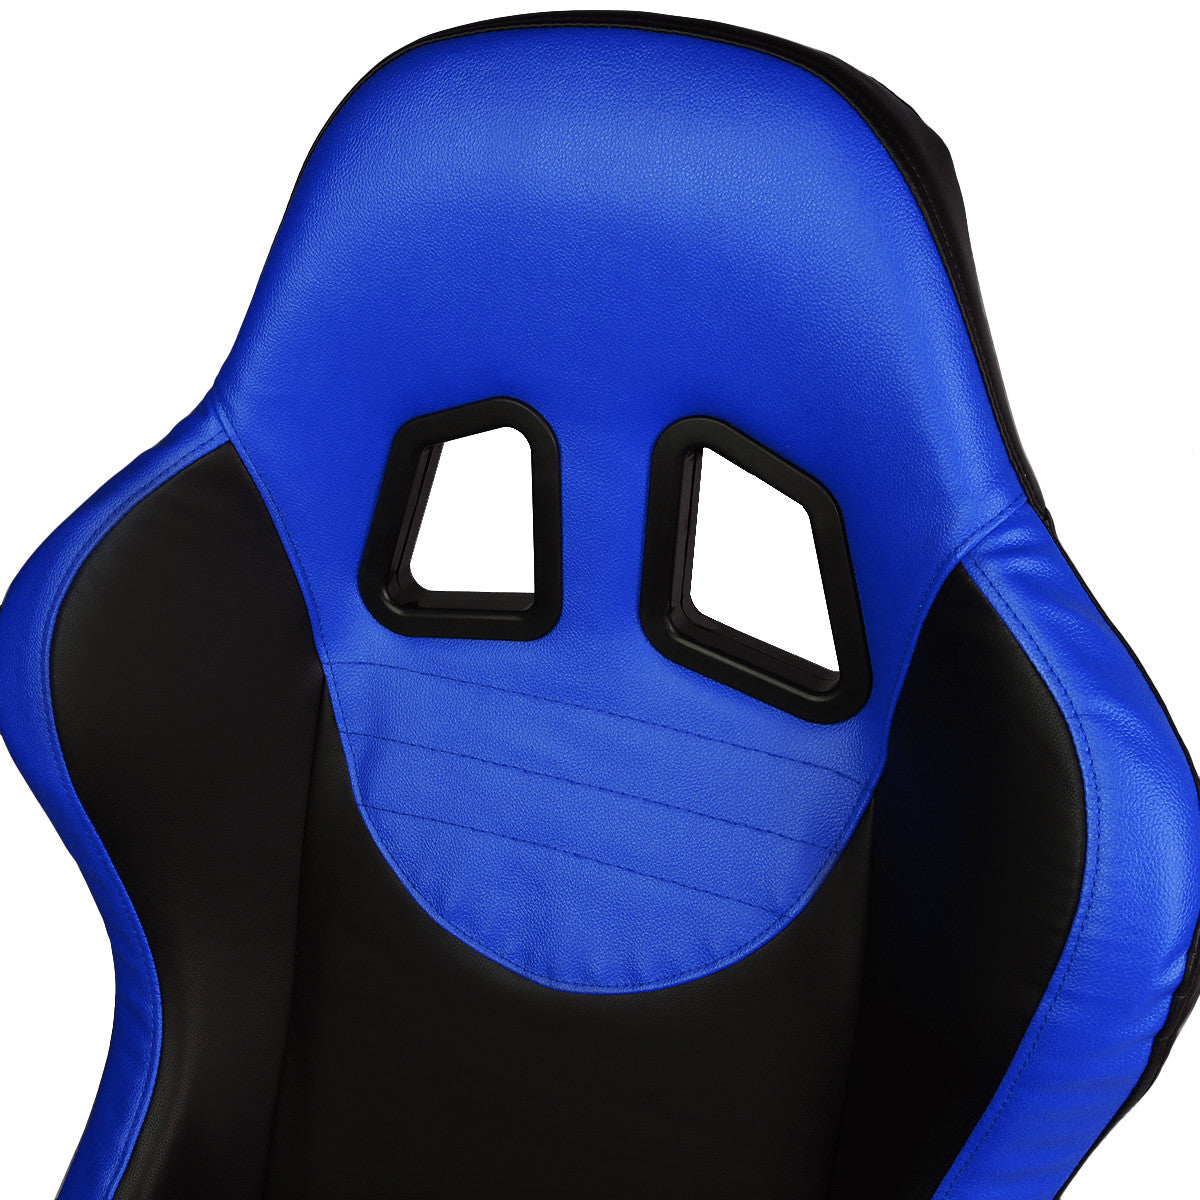 Racing Seats - Reclinable - PVC Leather - Type-R - Pair